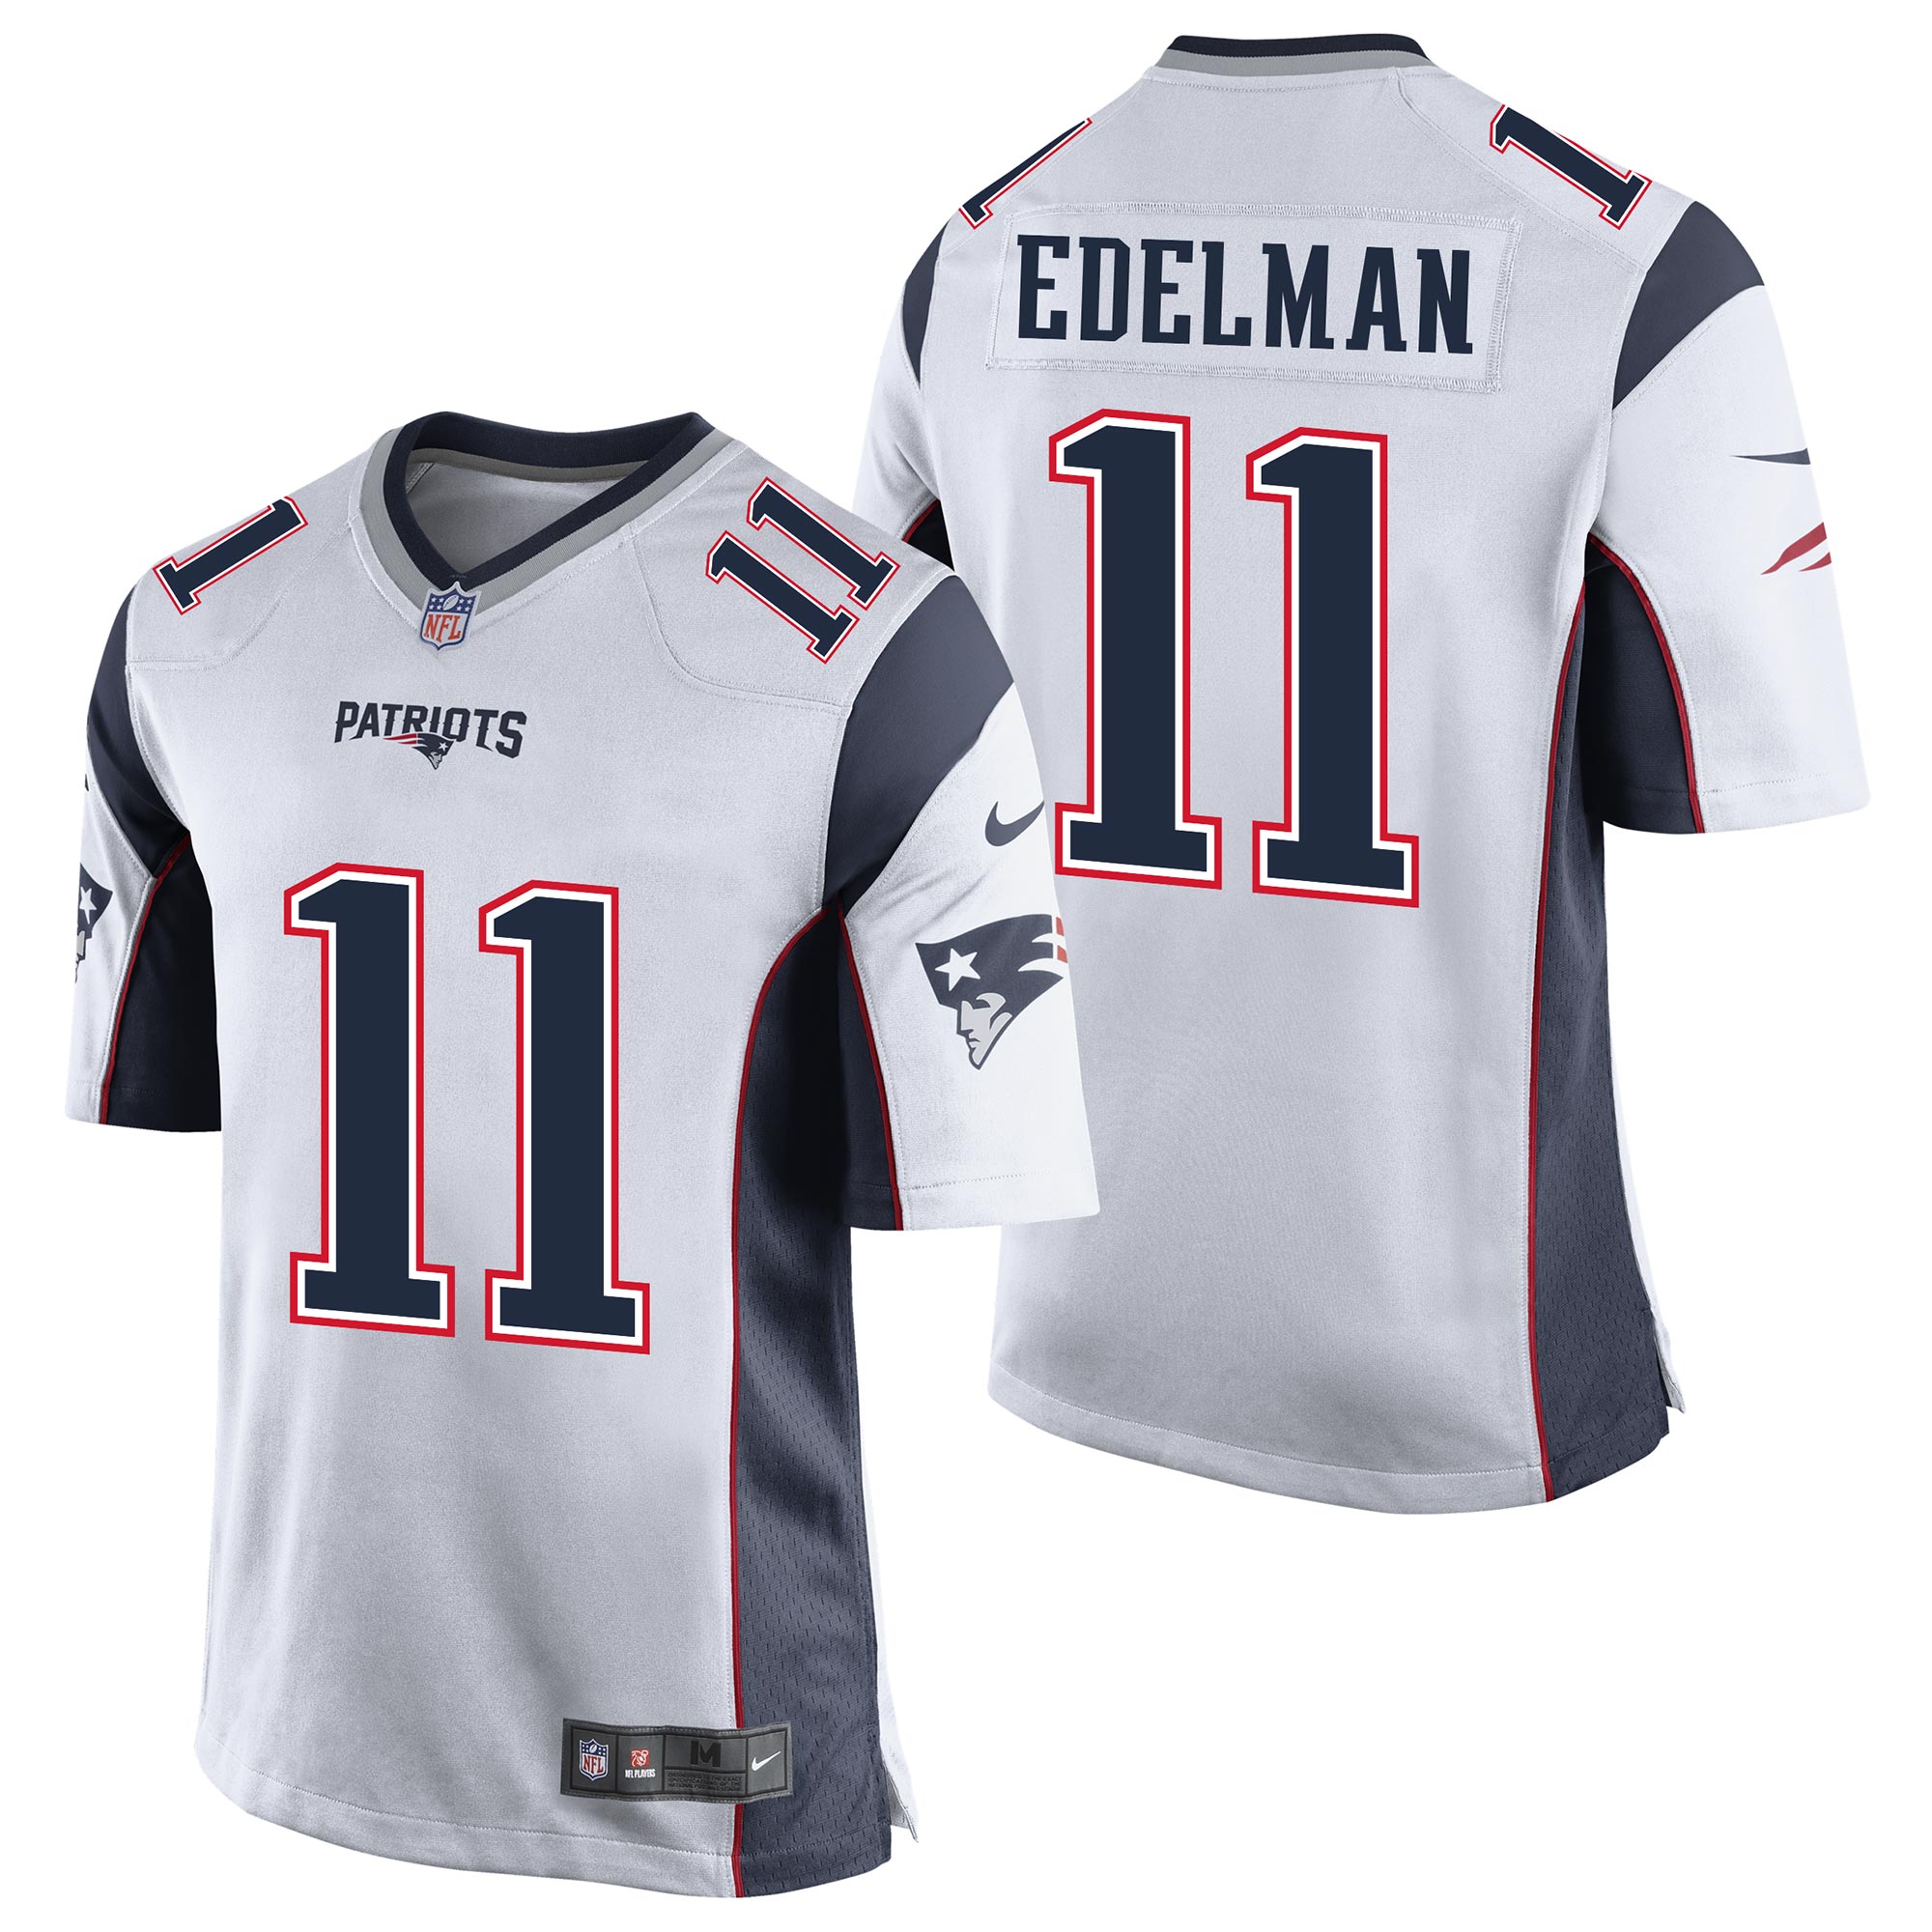 julian edelman salute to service jersey buy clothes shoes online